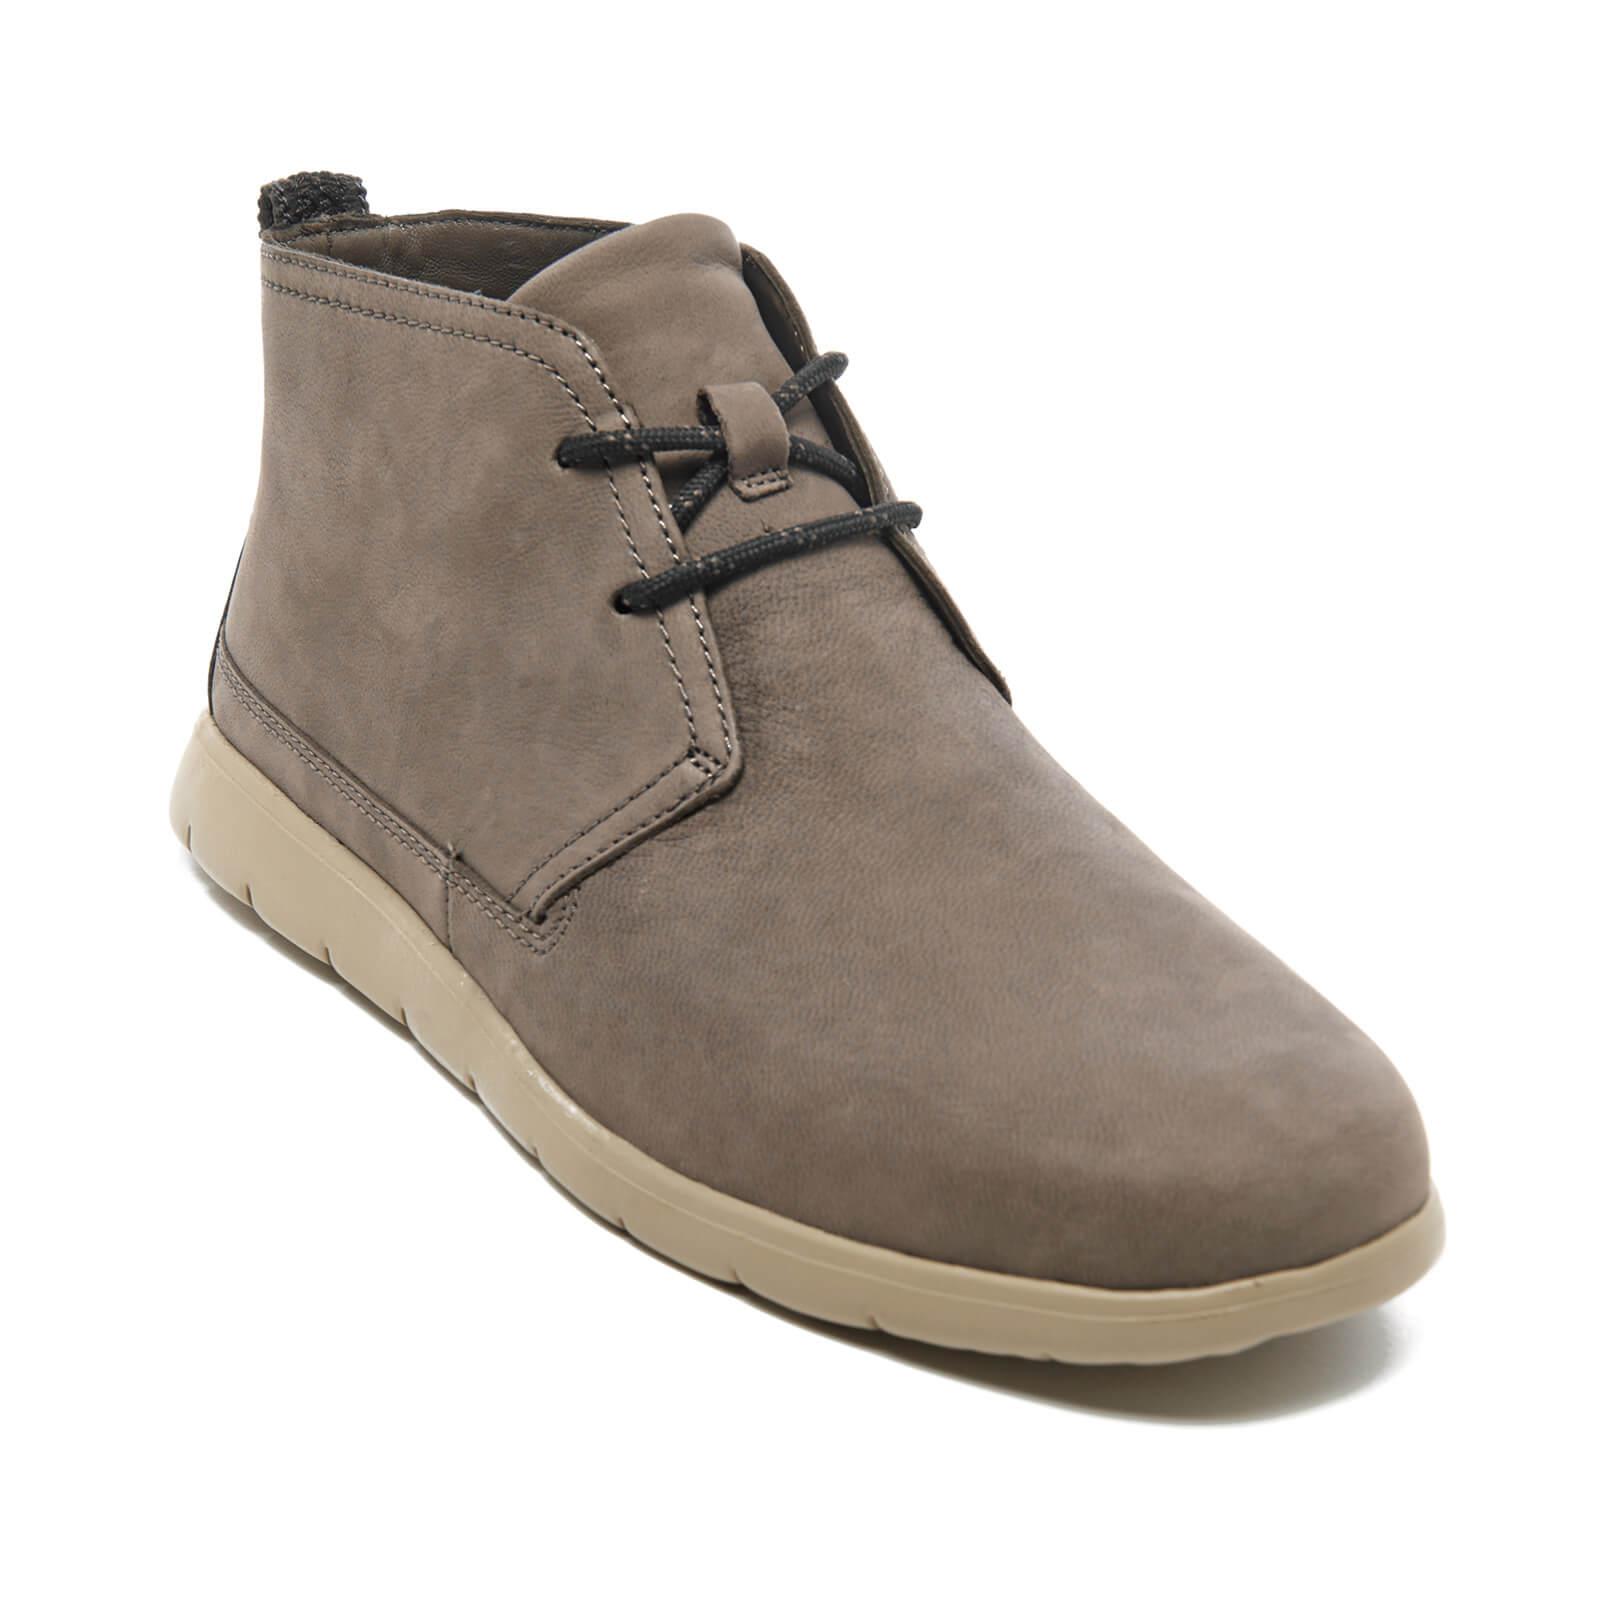 Ugg Freamon leather order now